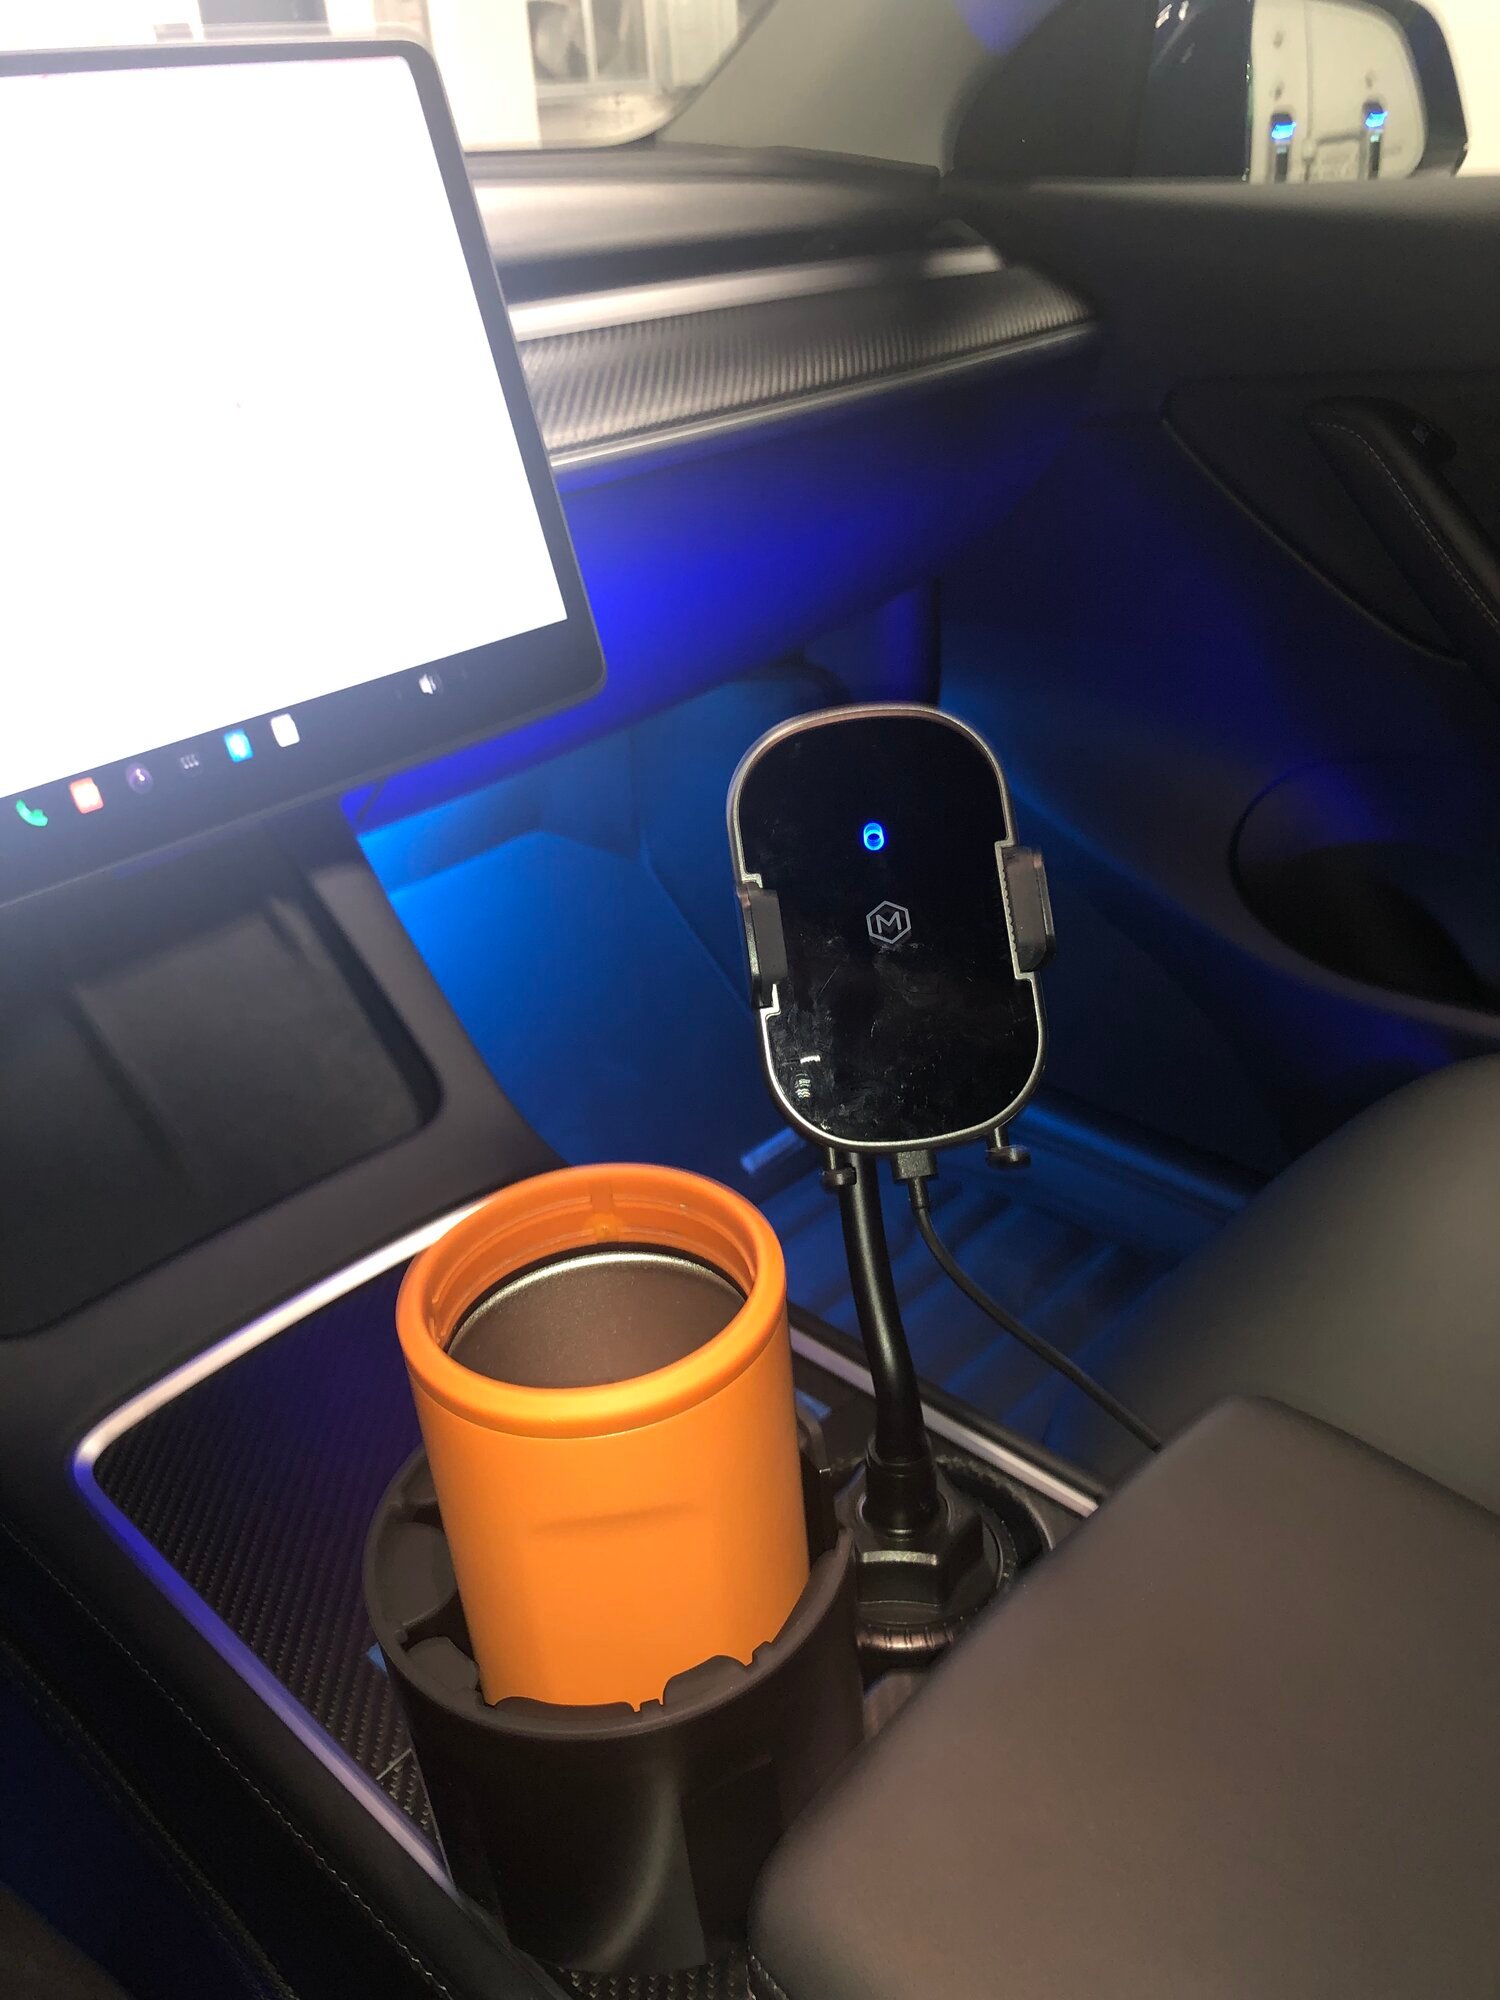 Perfect fit in cup holders : r/TeslaLounge